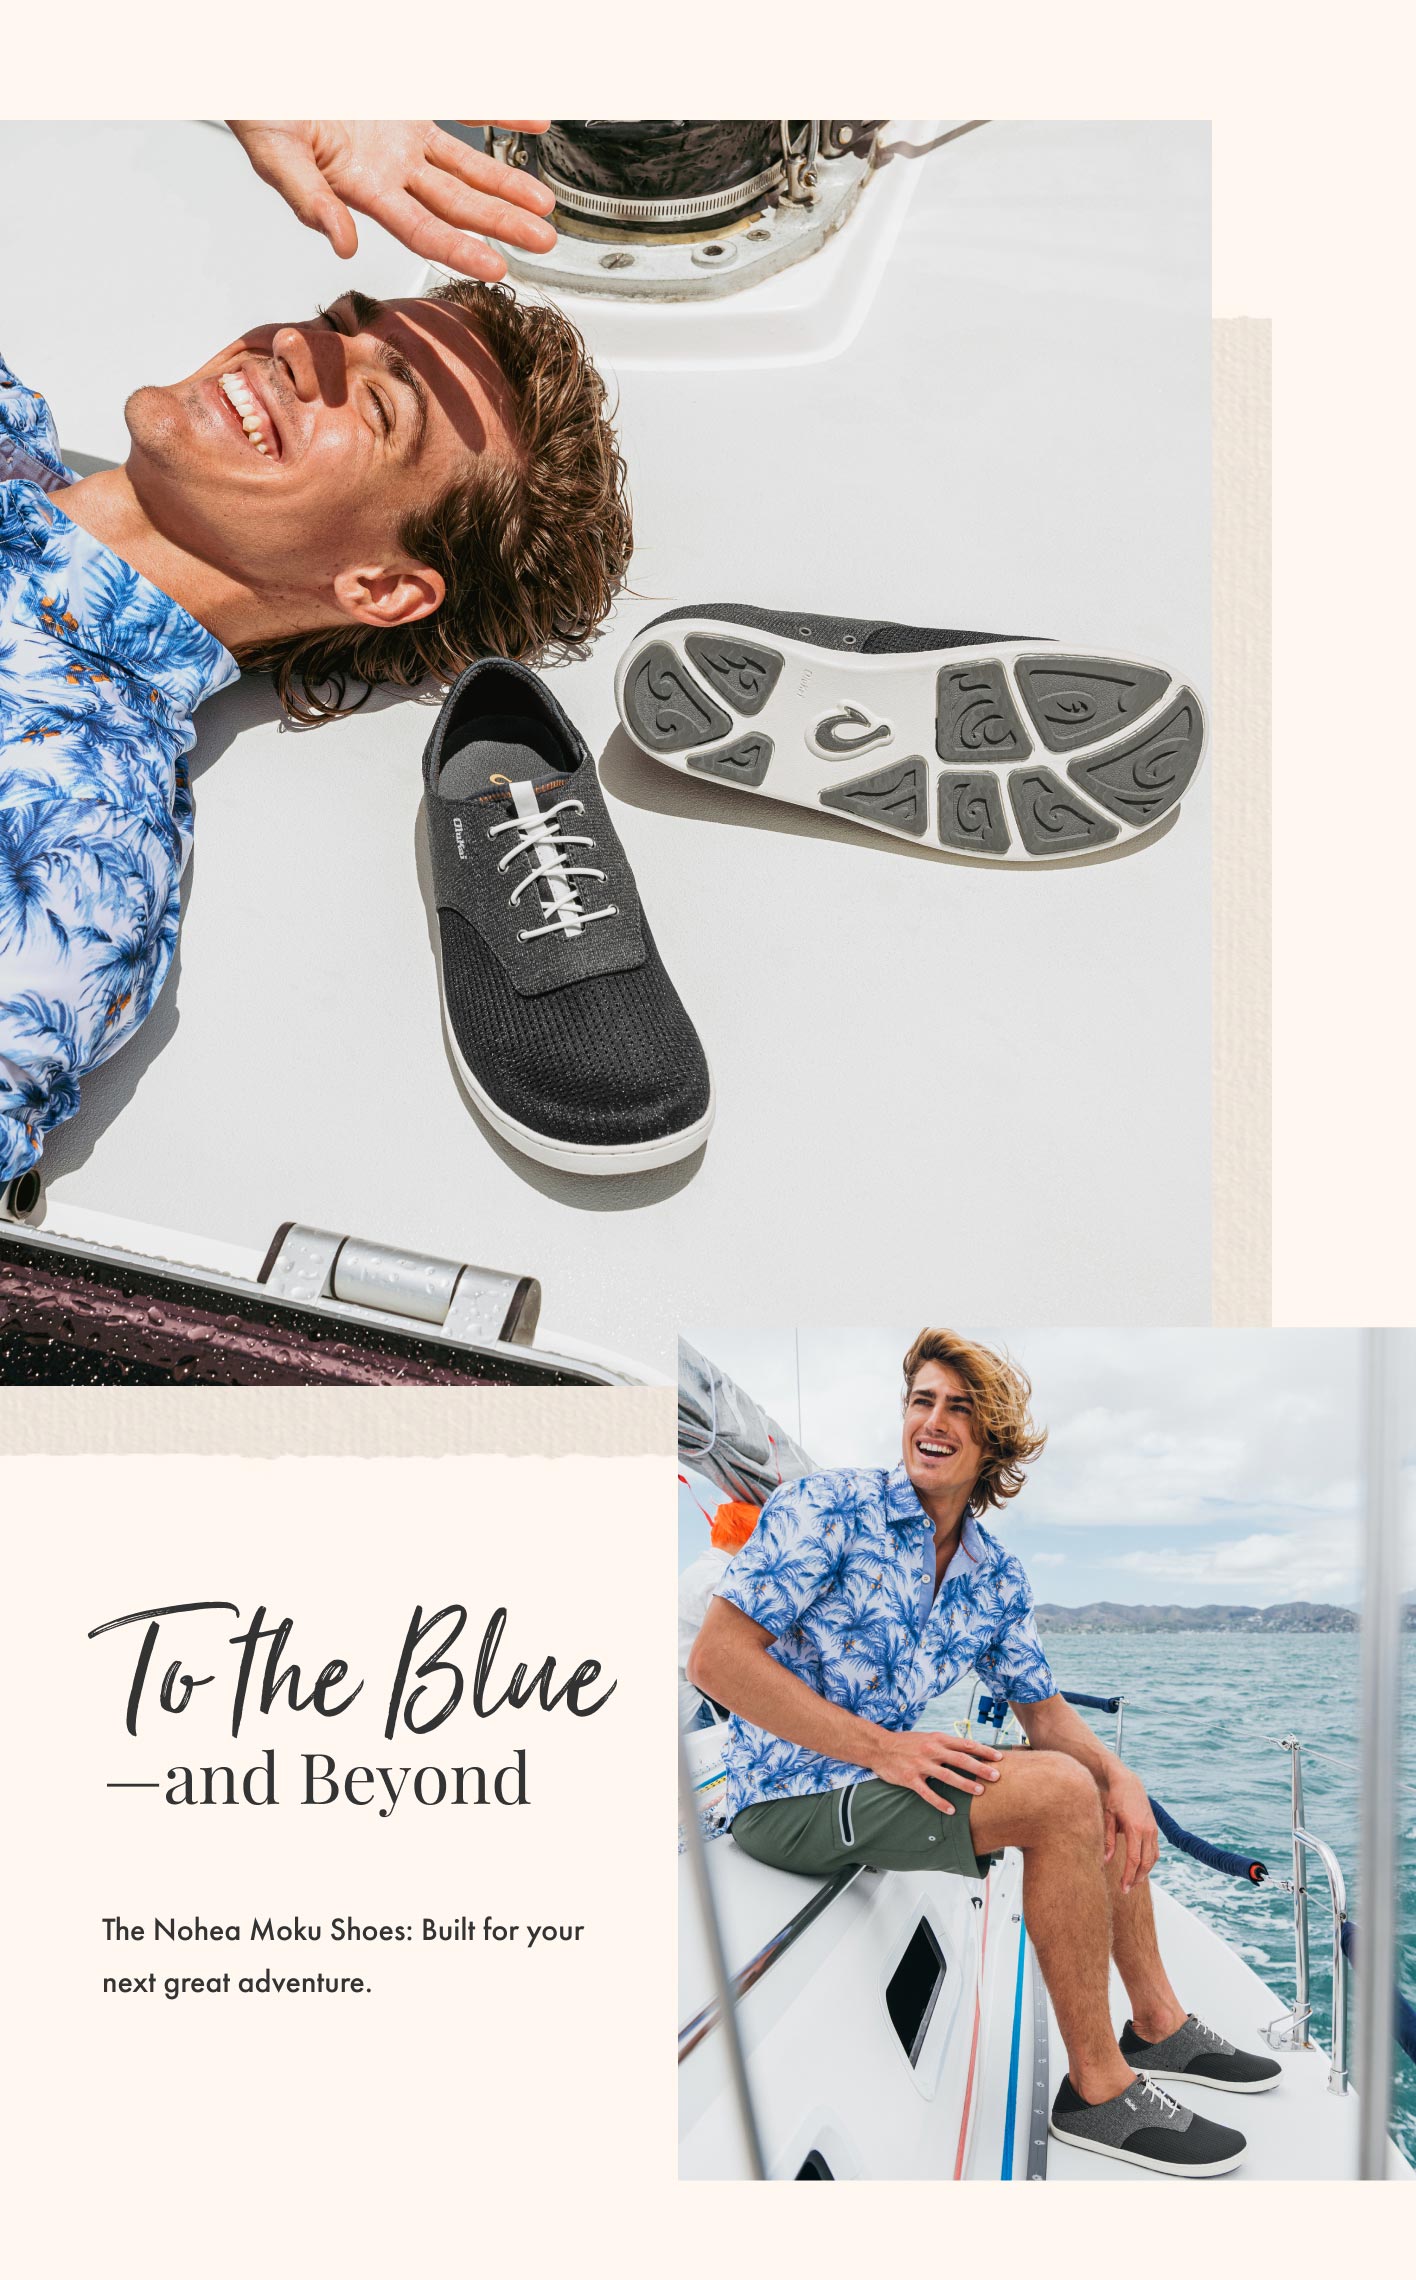 To the Blue and Beyond - Nohea Moku Shoes